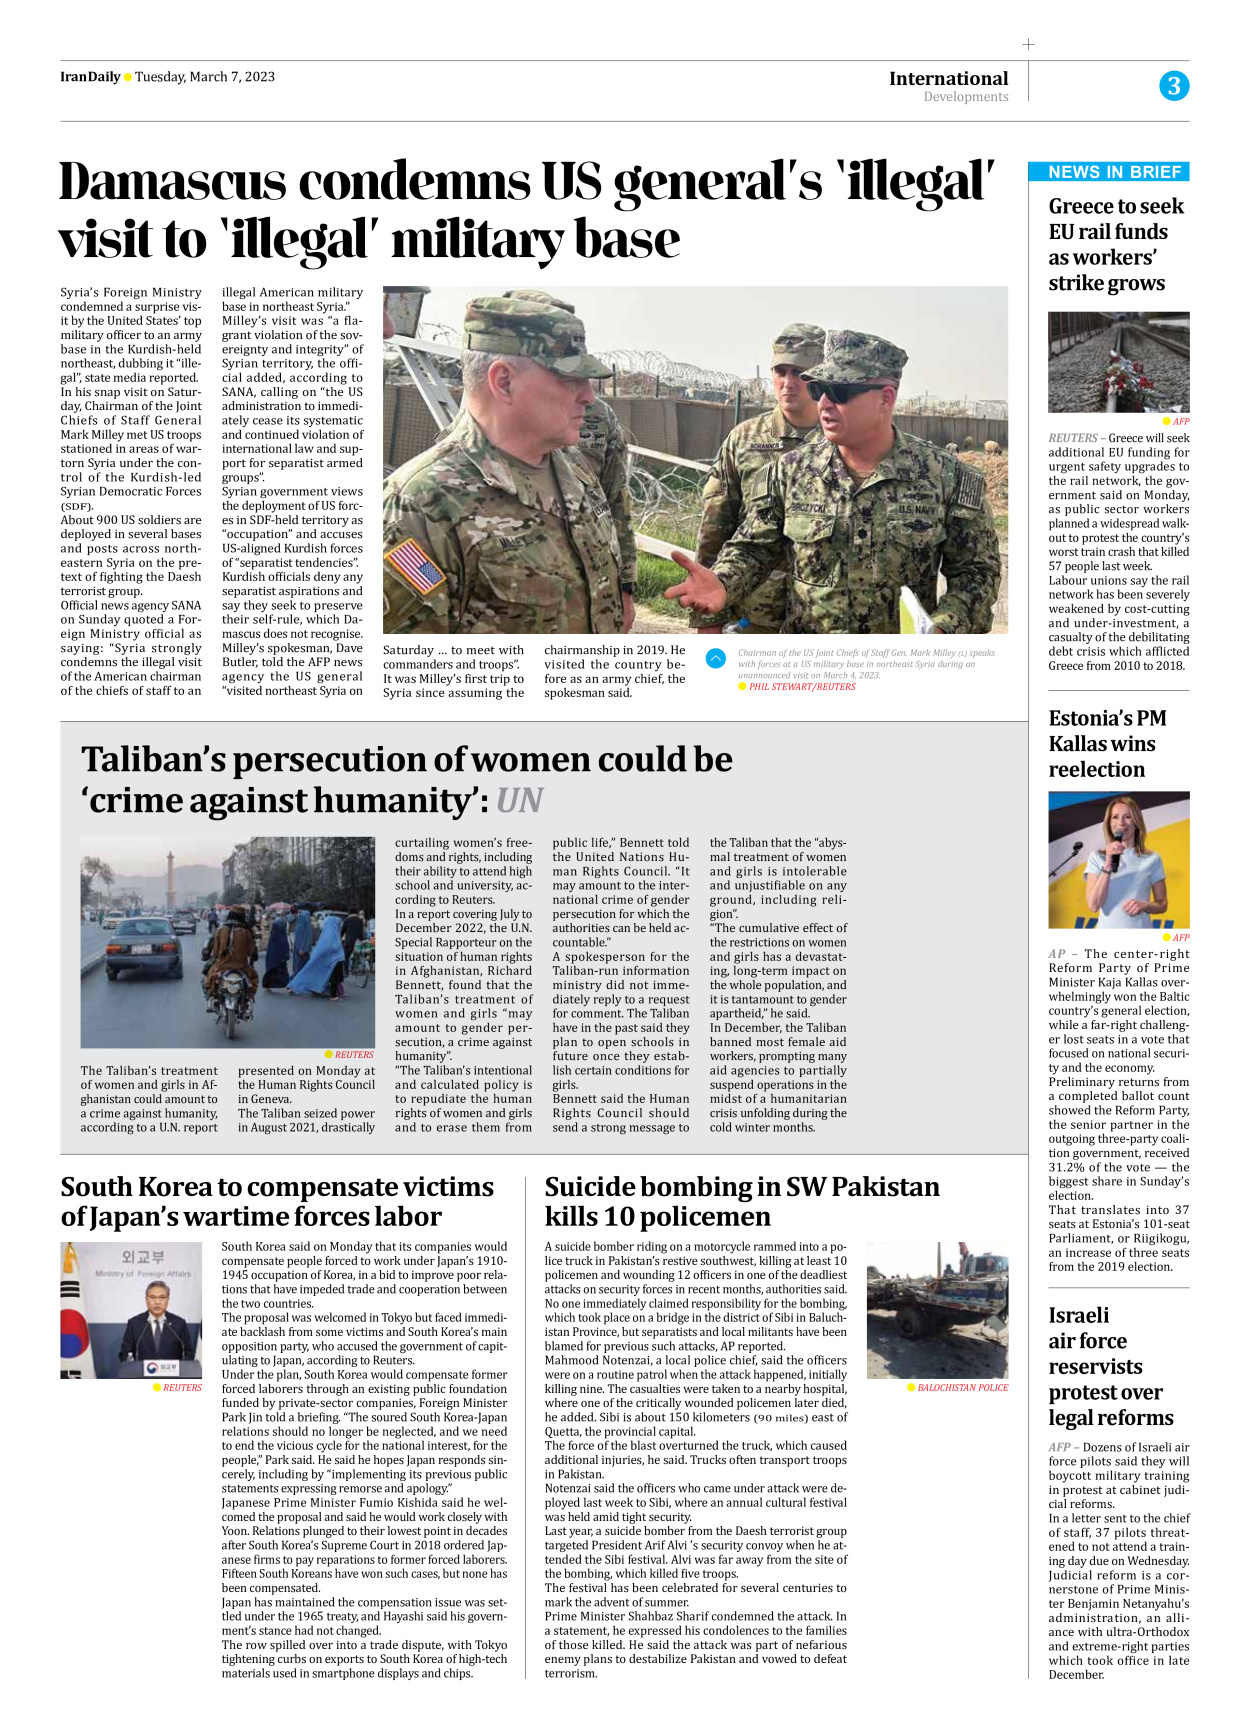 Iran Daily - Number Seven Thousand Two Hundred and Fifty Three - 07 March 2023 - Page 3